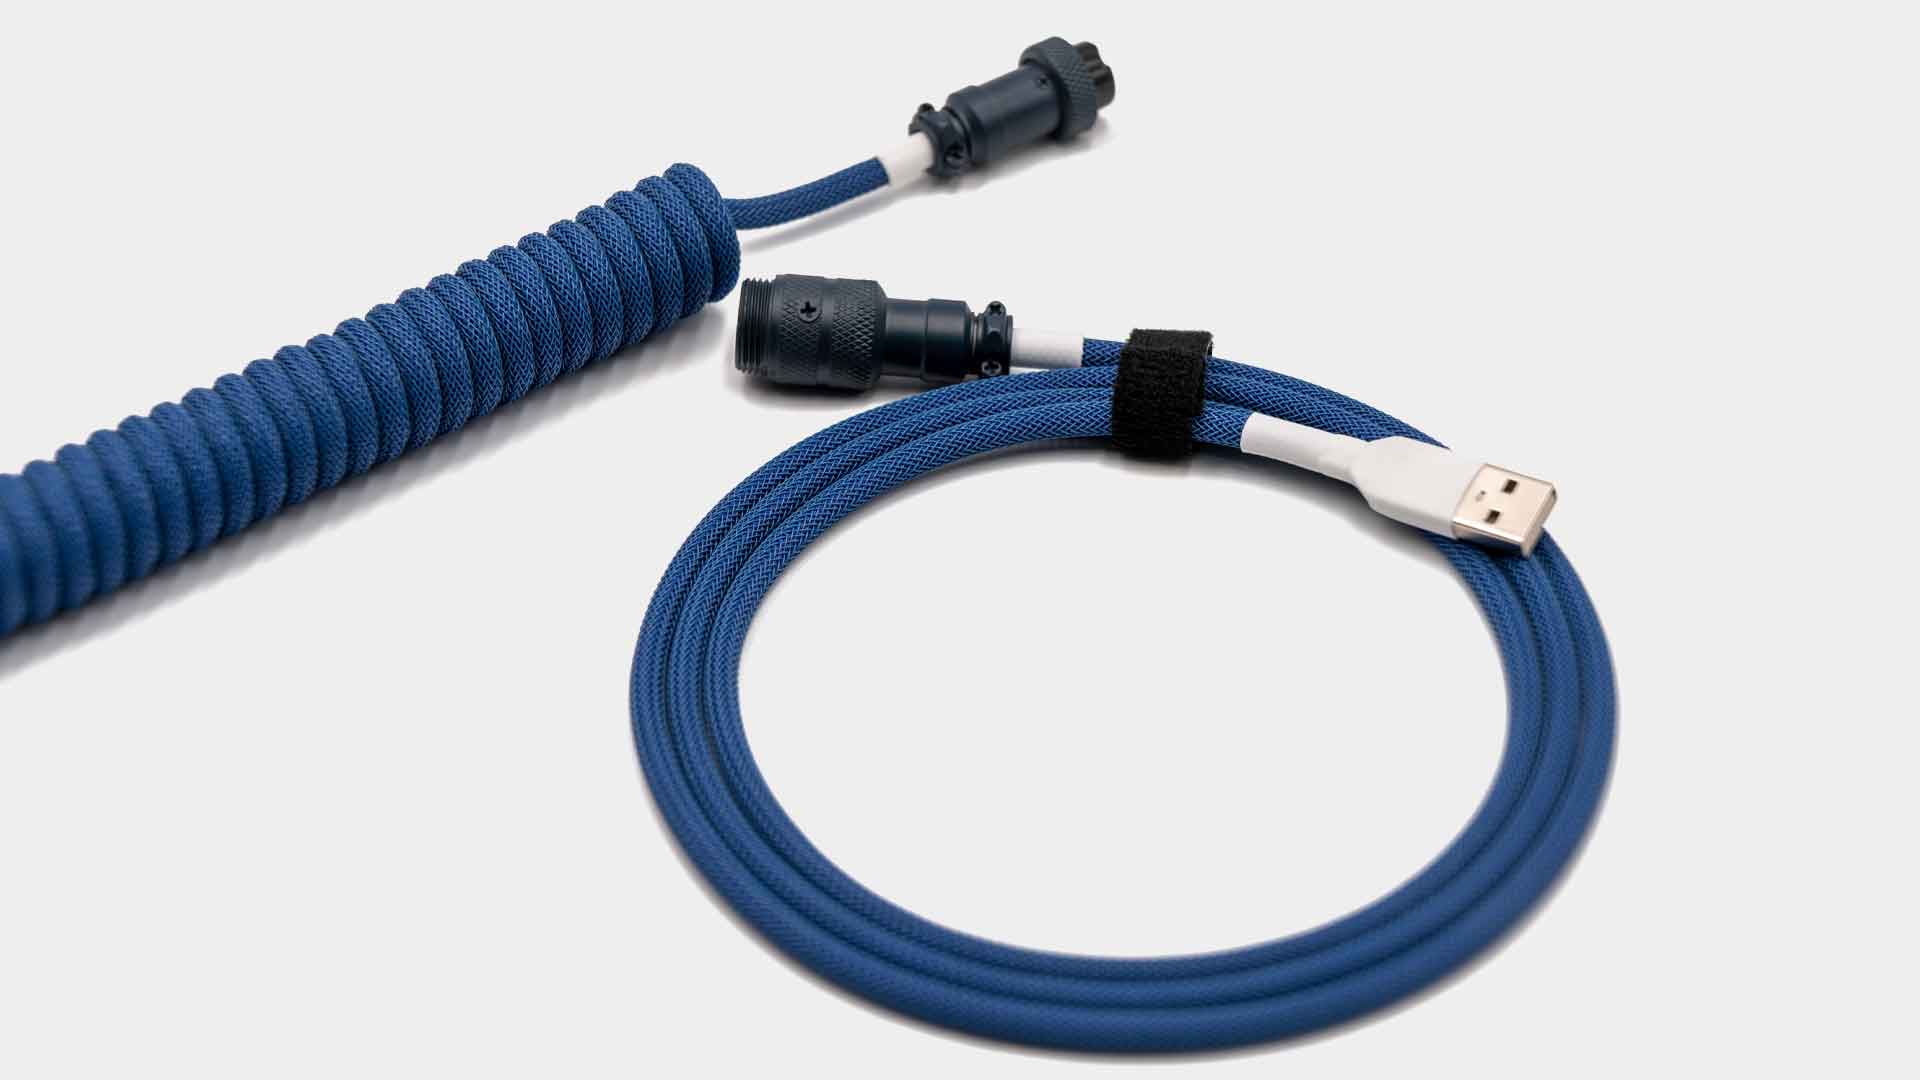 Striker 2 Cable-Space Cables-coiled keyboard cable-coiled usb c cable-coiled cable keyboard